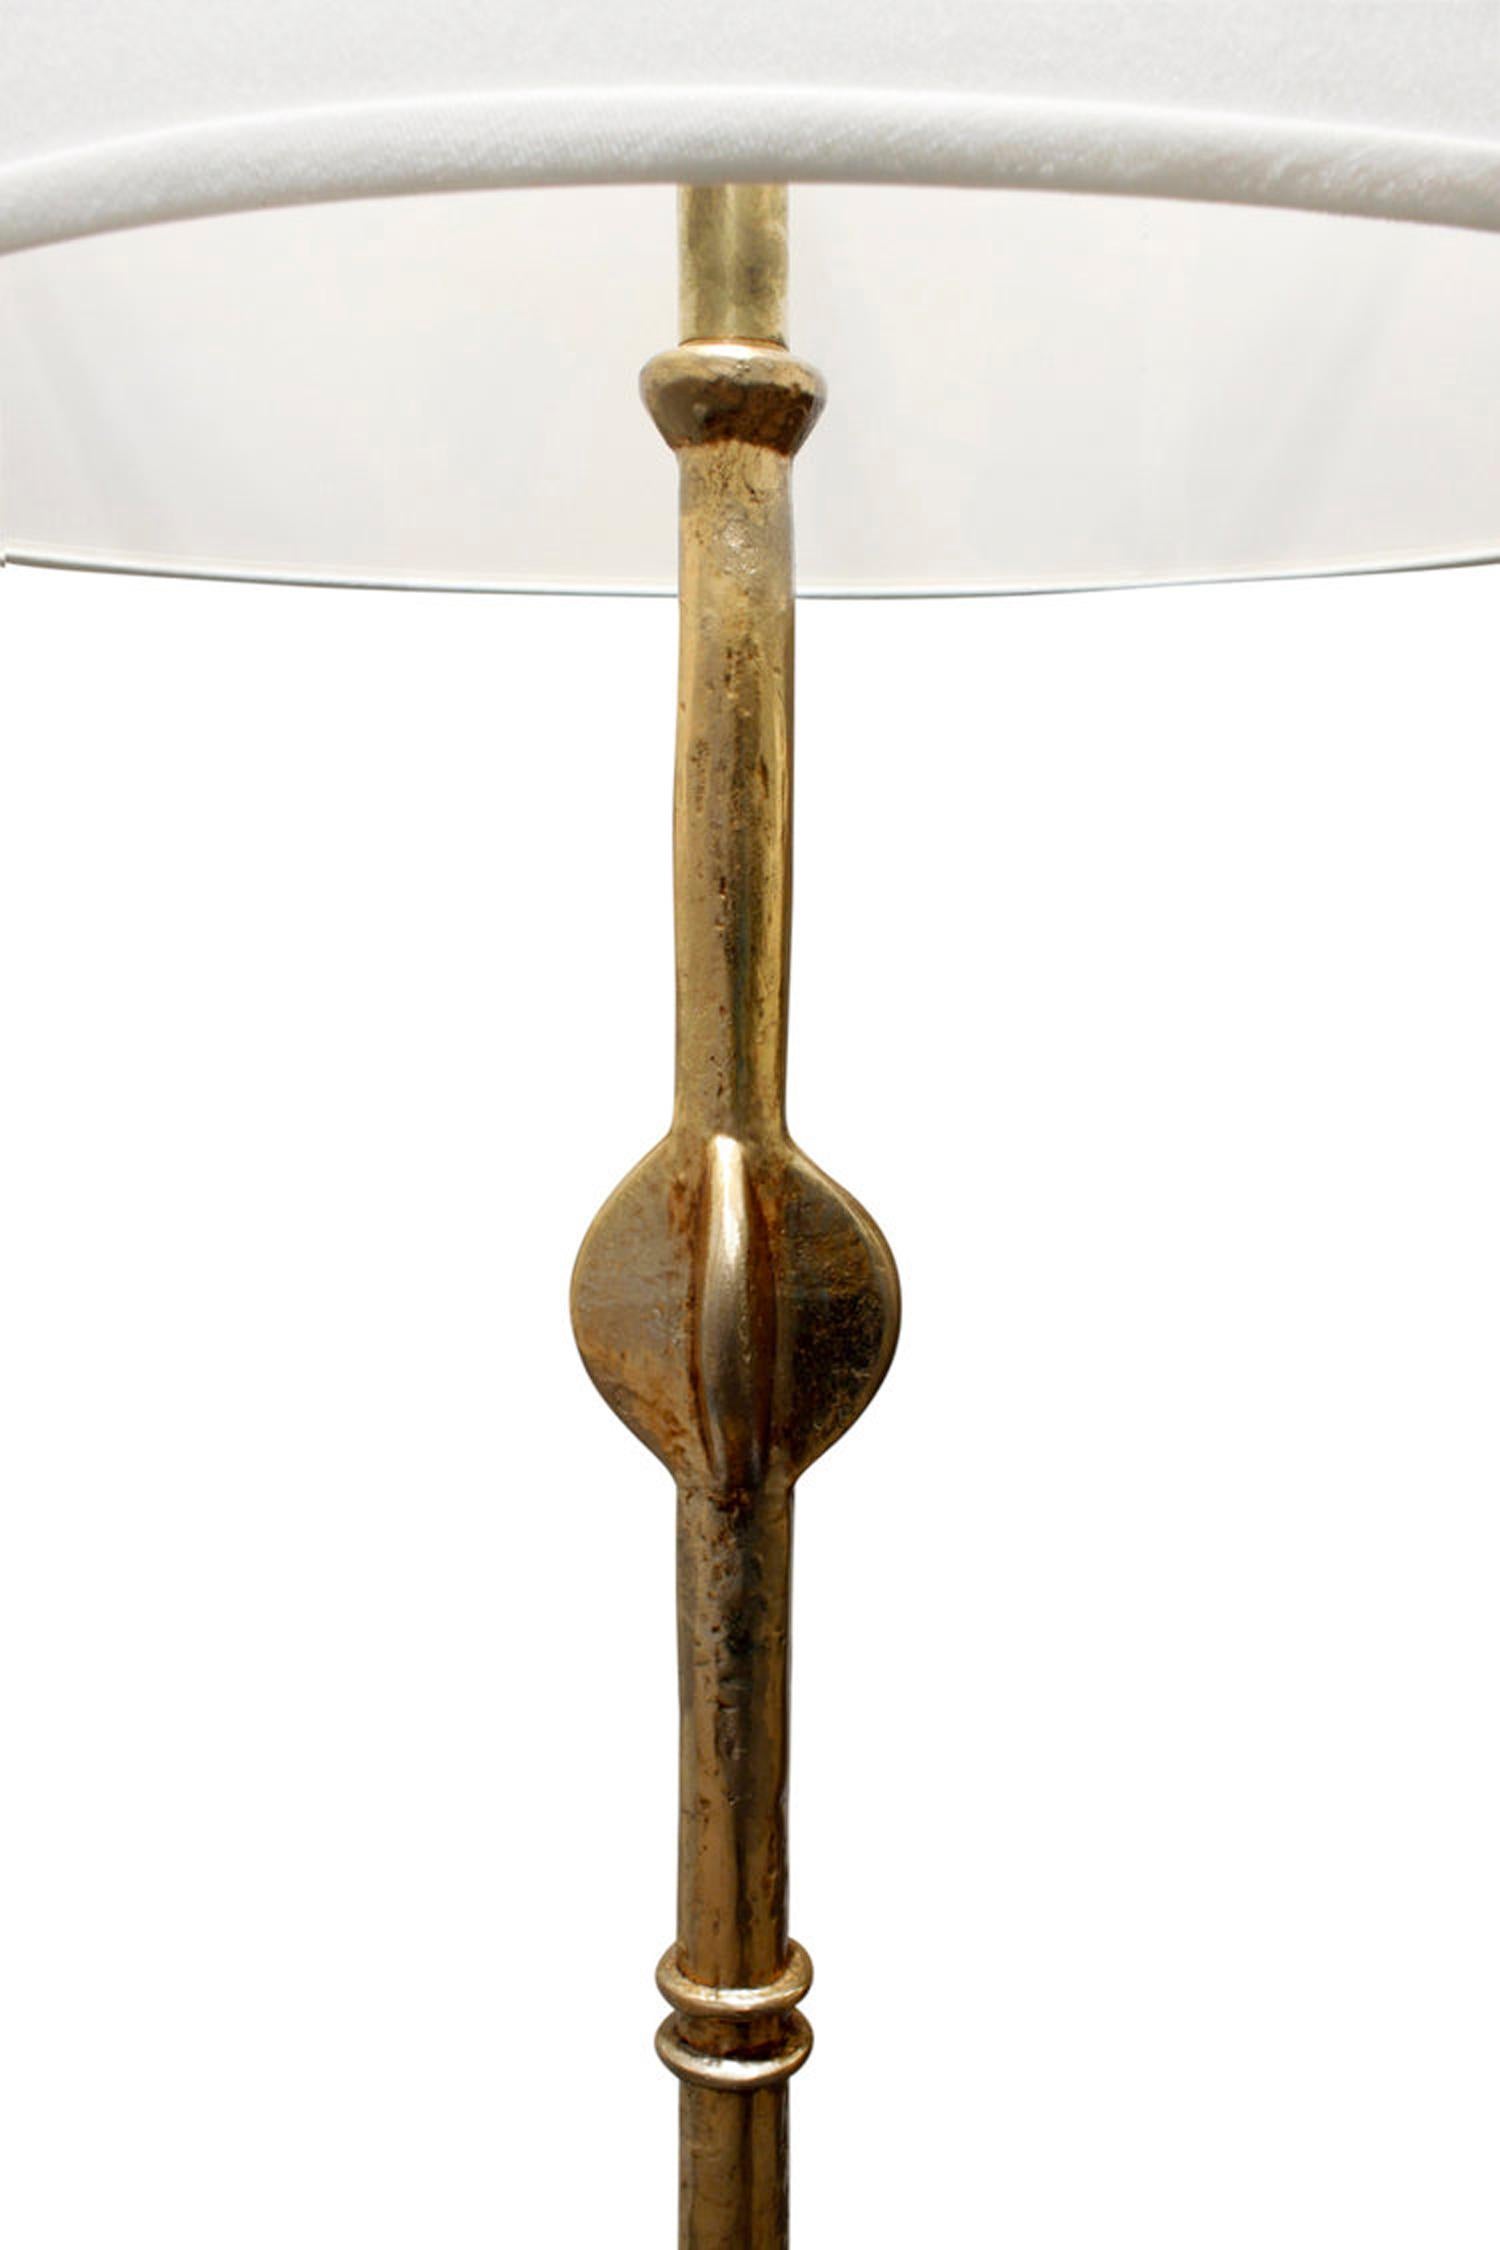 Pair of beautifully crafted gilded Giacometti style floor lamps, custom design, American 1970's. These are both hand-forged and extremely elegant.

Shade shown is 19.5 inches in diameter.